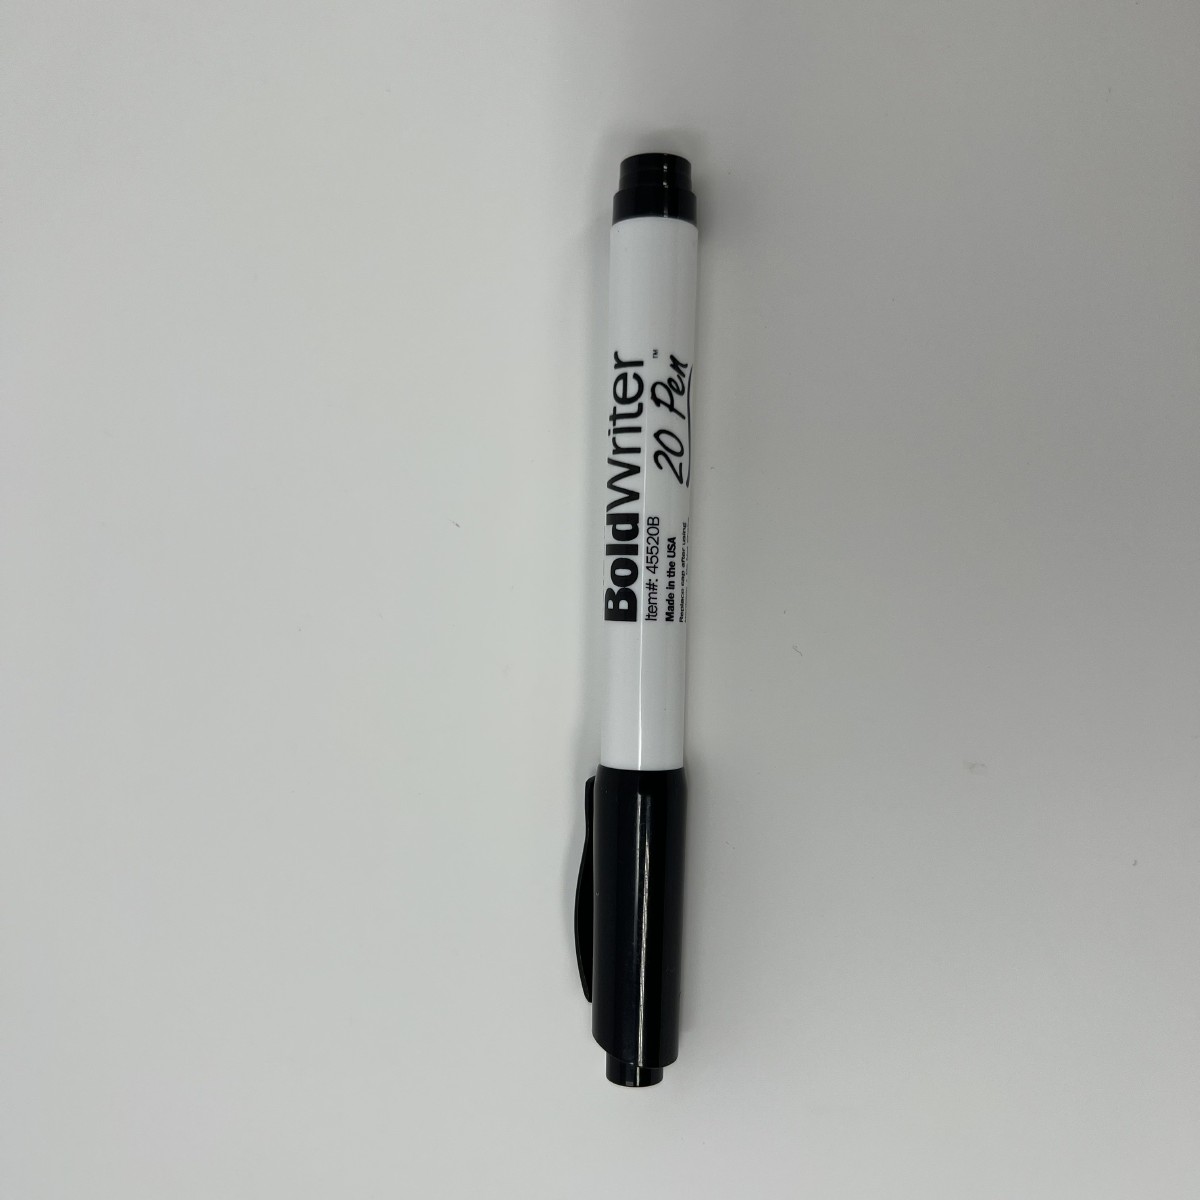 Larger picture of our BoldWriter 20 Pen